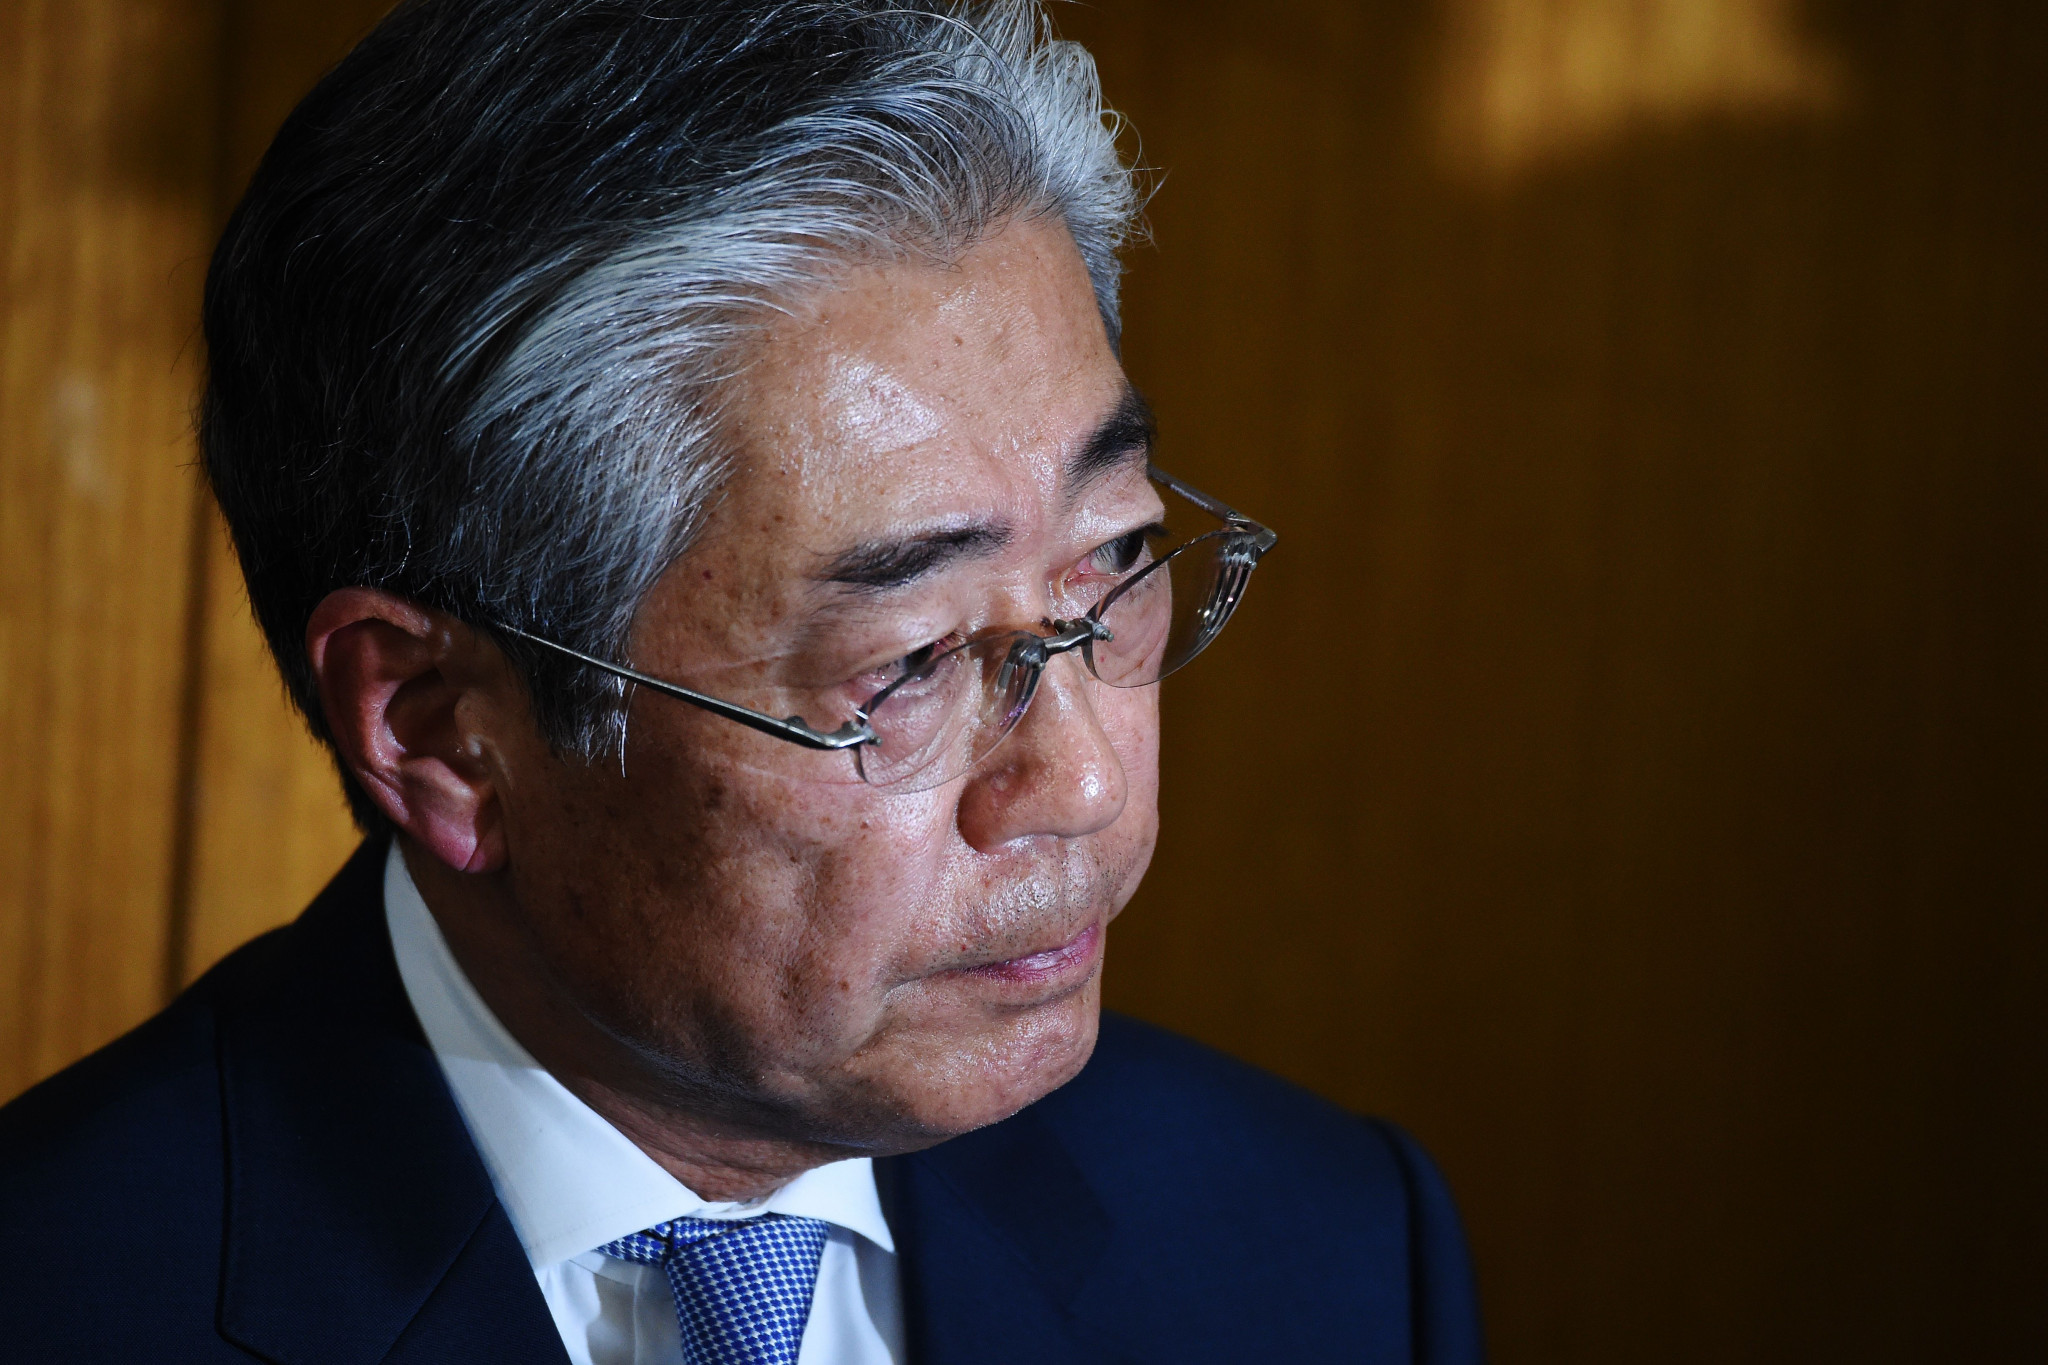 Tsunekazu Takeda's term as JOC President concludes on June 27 after he confirmed he would not seek re-election ©Getty Images